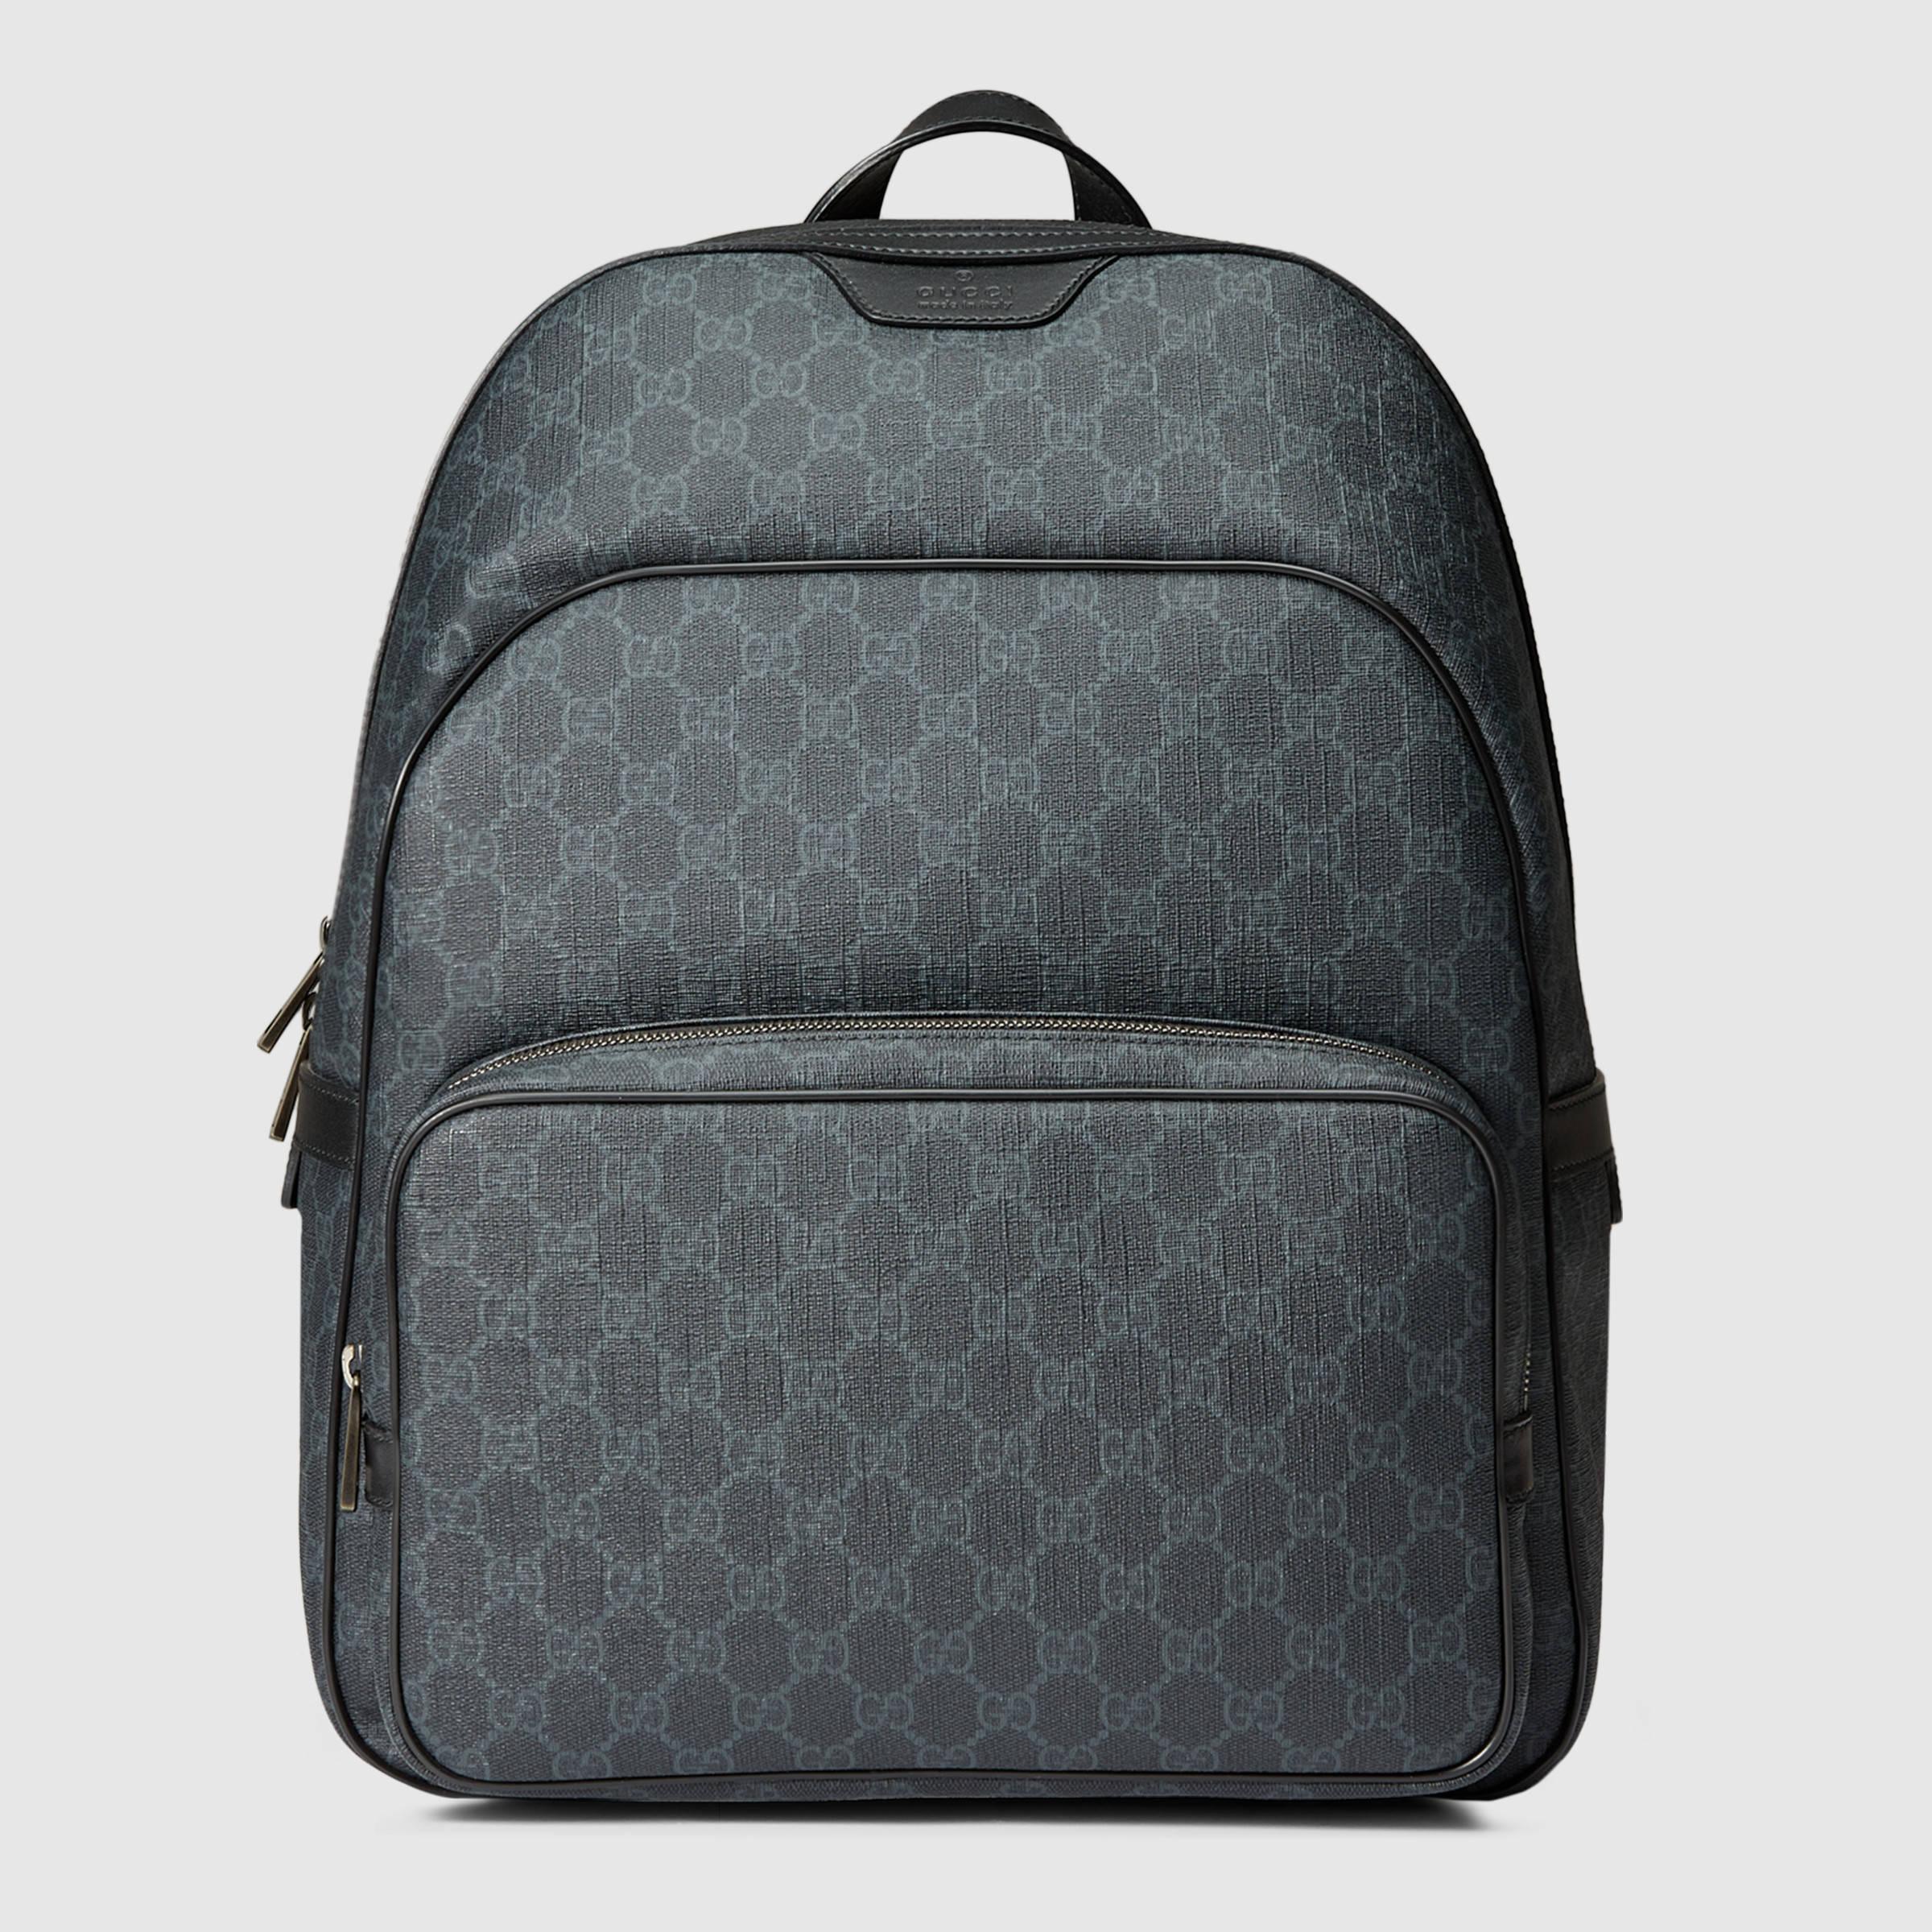 Gucci Gg Supreme Backpack | Paul Smith